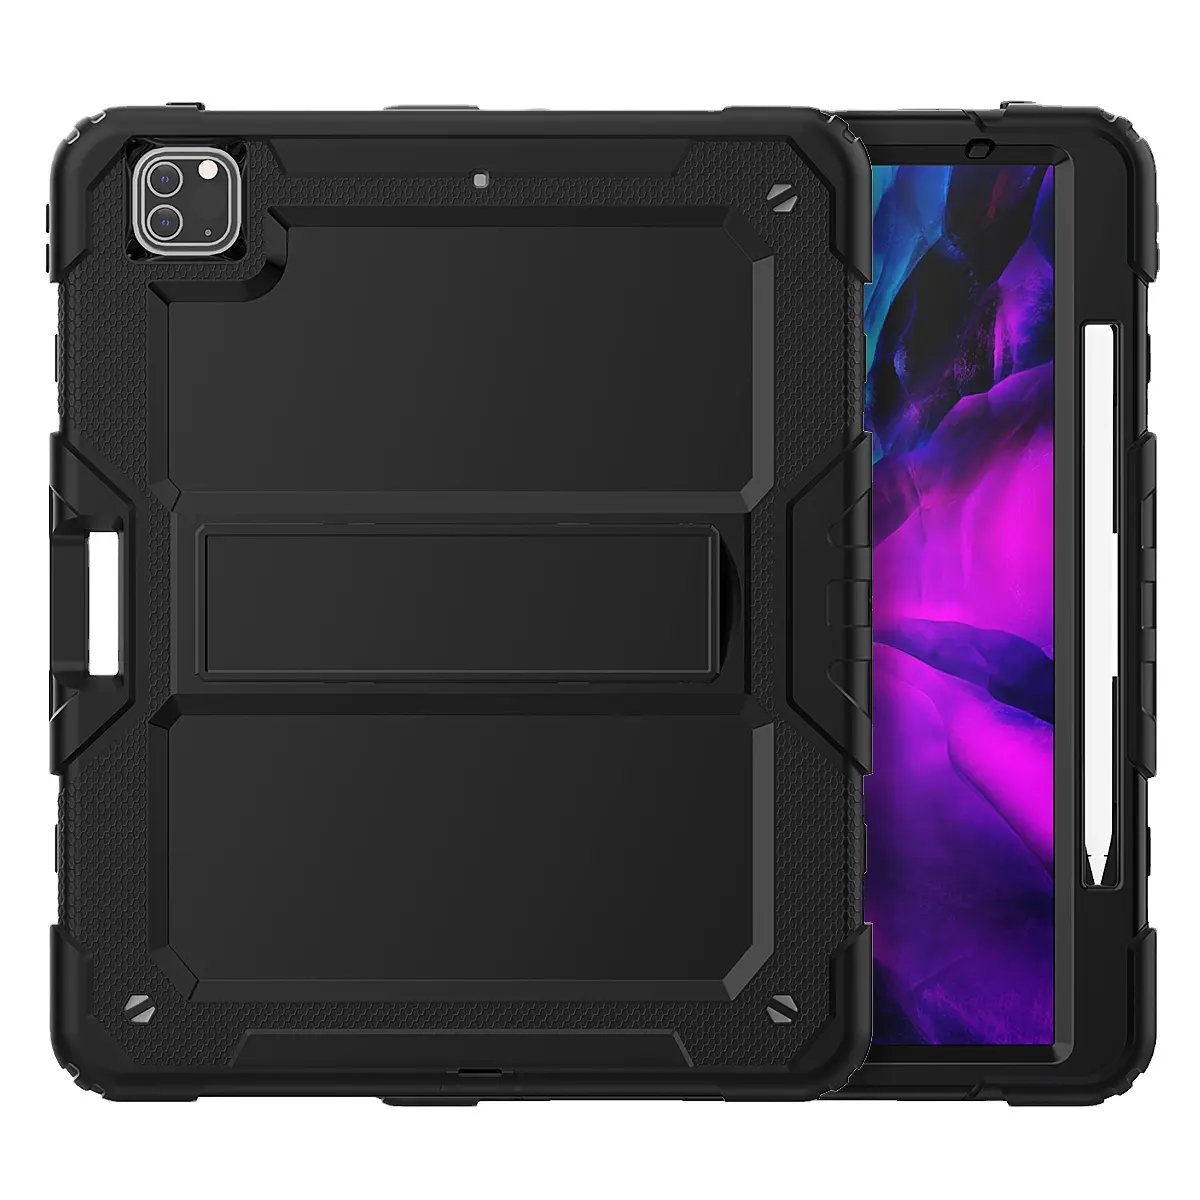 2020 Portable Promotional Shockproof Tablet Accessories Cover Case For ipad pro 12.9'' with adjustable shoulder